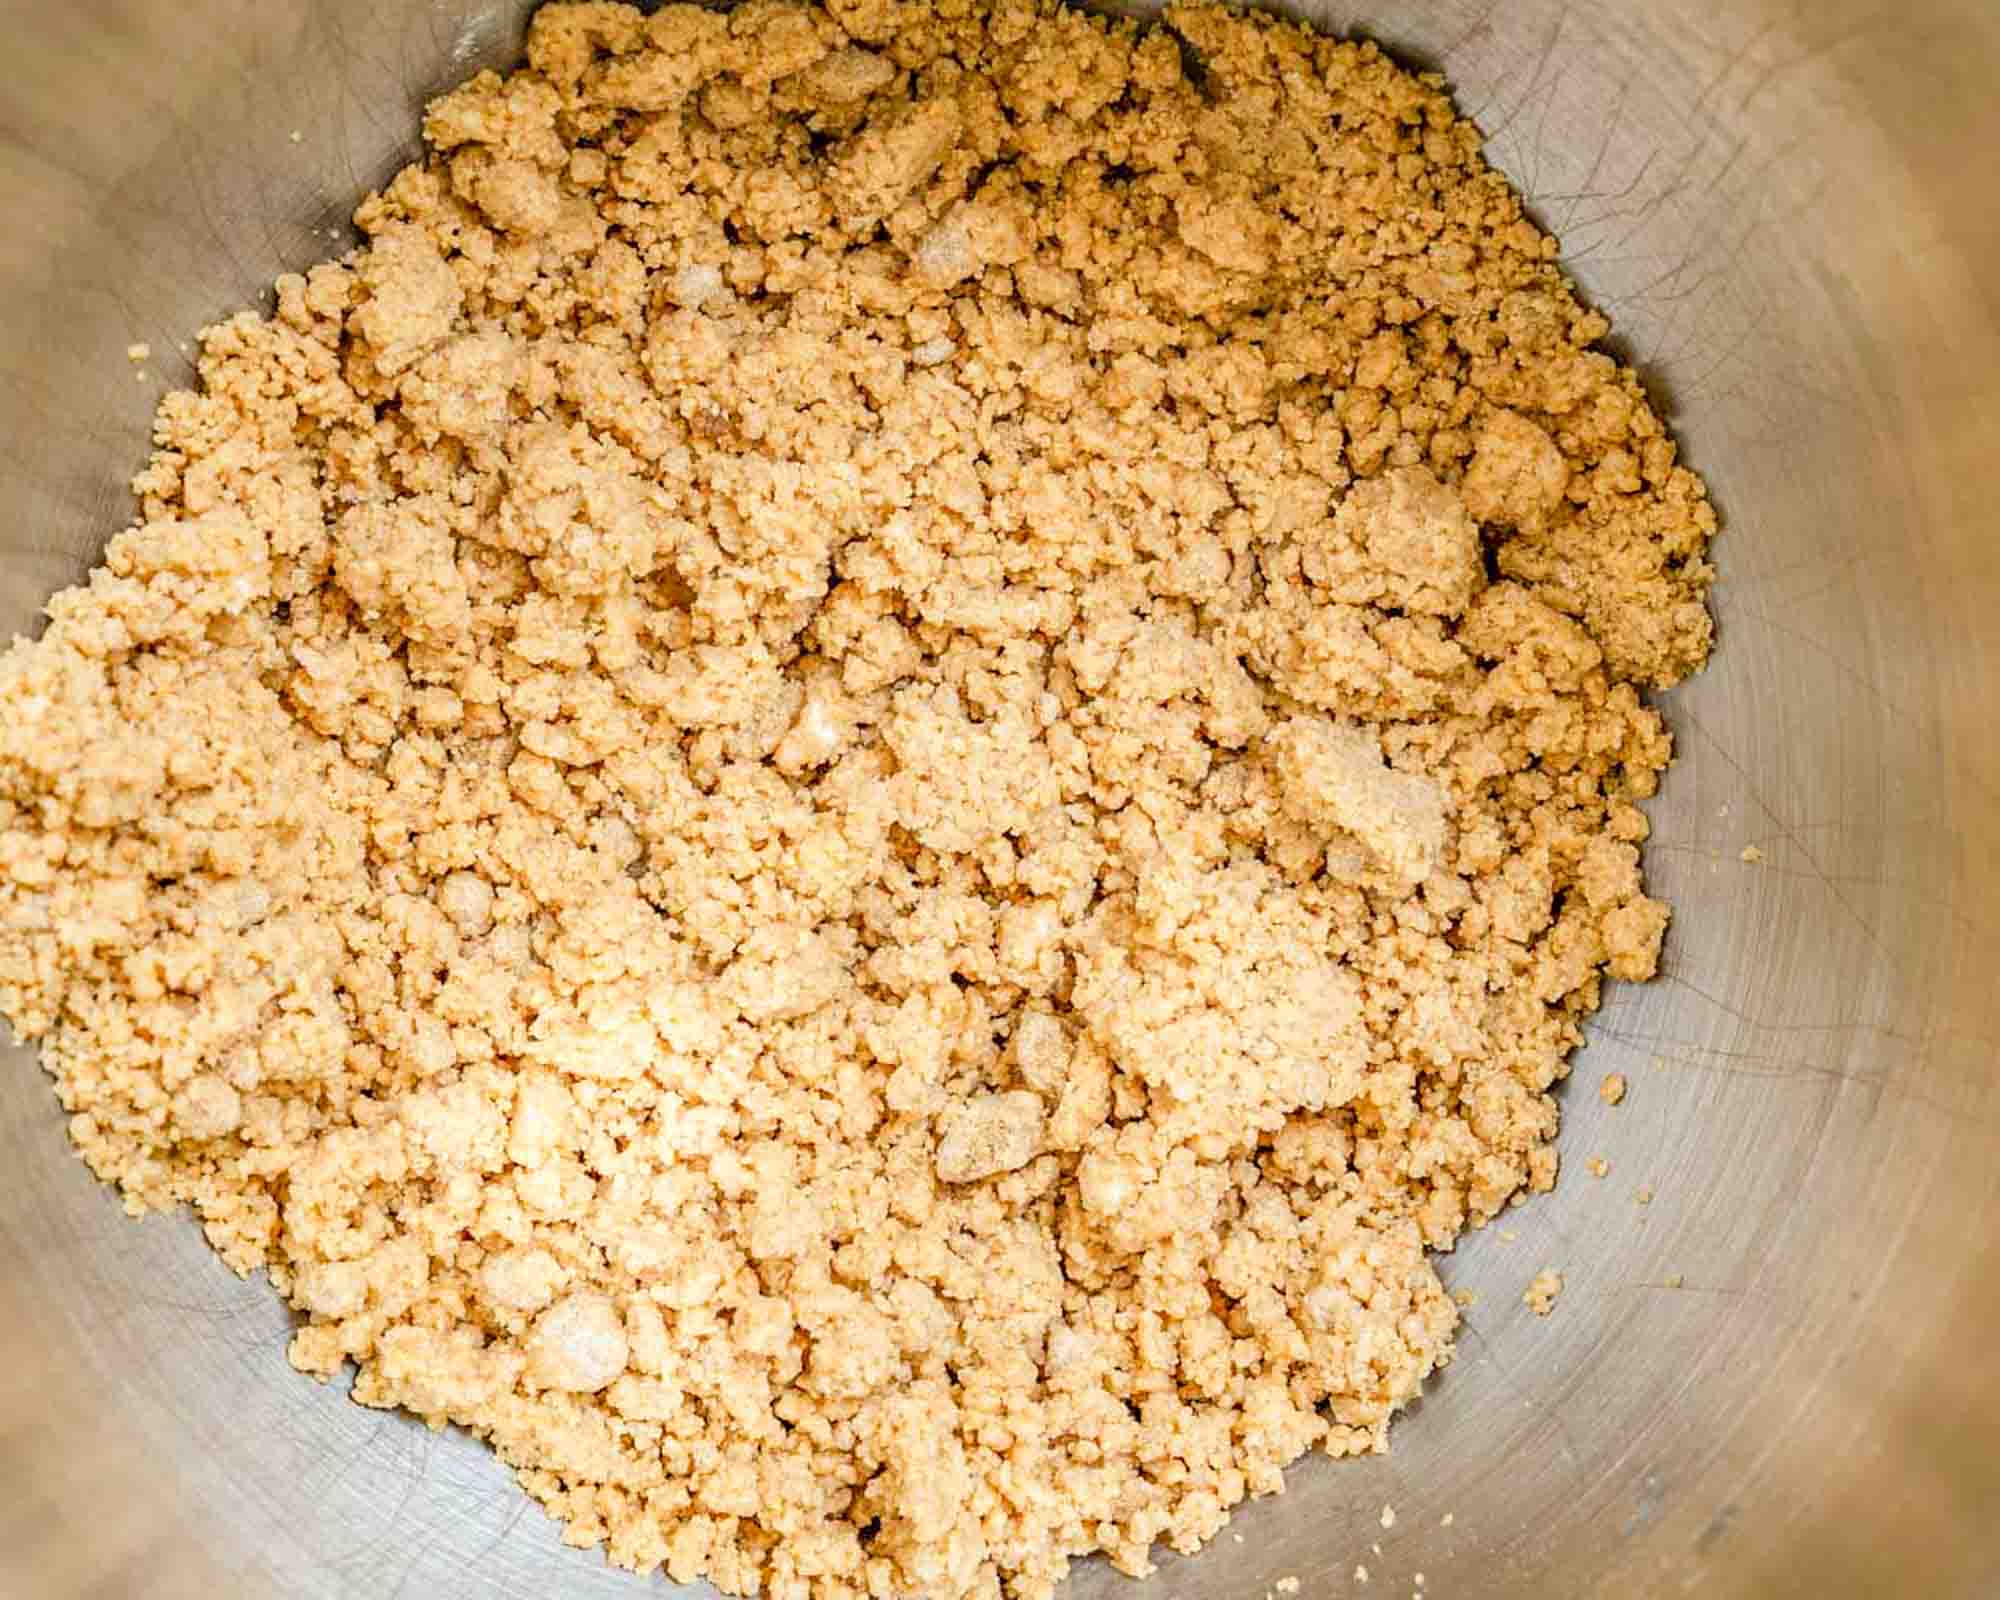 Crumbled peanut butter topping for a peanut butter cream cheese dessert.